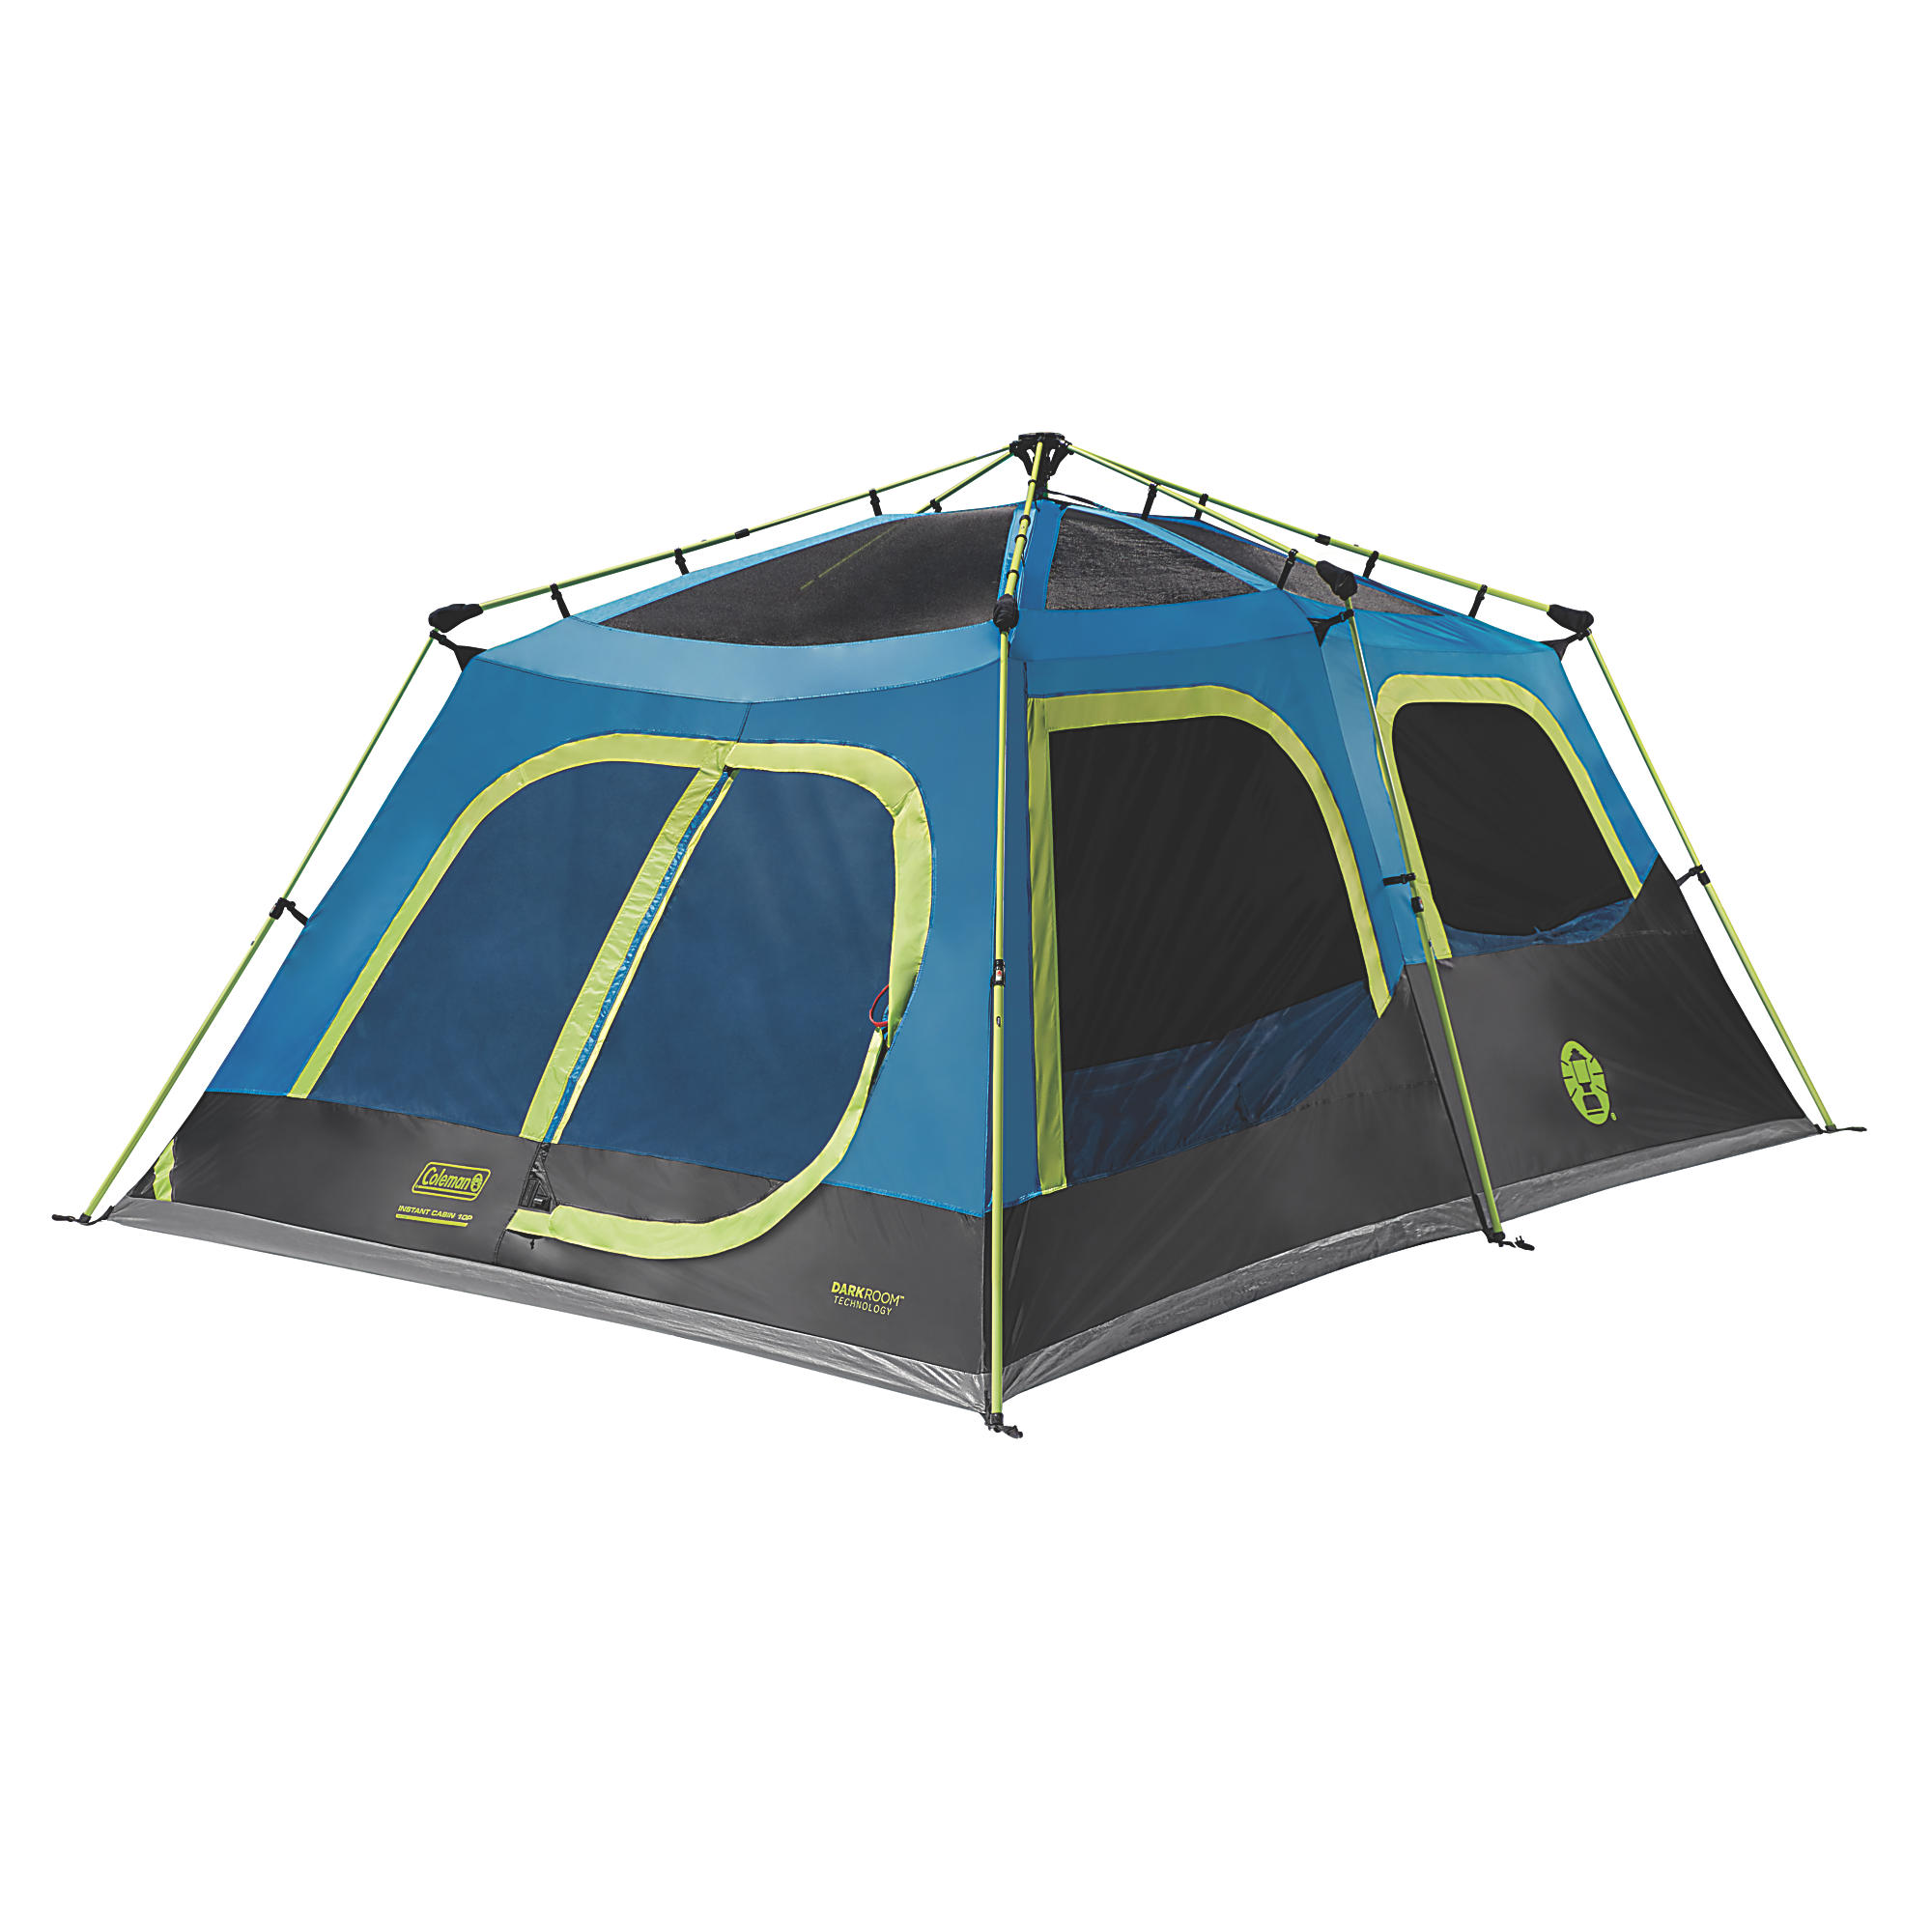 Coleman® 10-Person Dark Room™ Cabin Camping Tent with Instant Setup, 1 Room, Blue - image 2 of 6